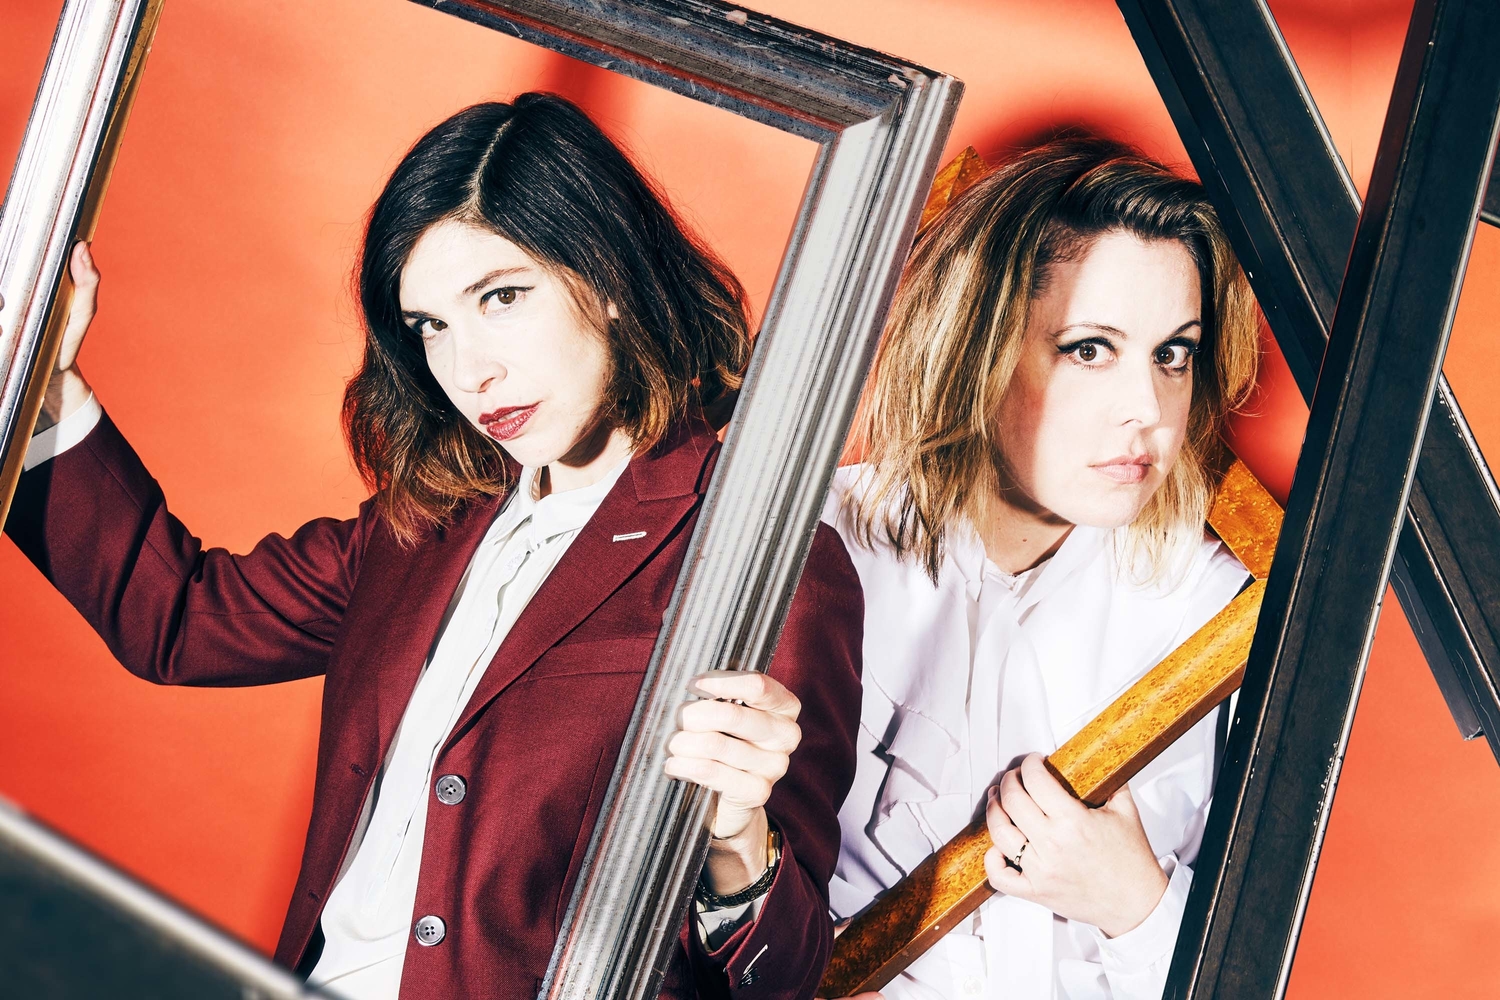 Right In The Chaos: Sleater-Kinney are the cover stars of DIY’s August issue